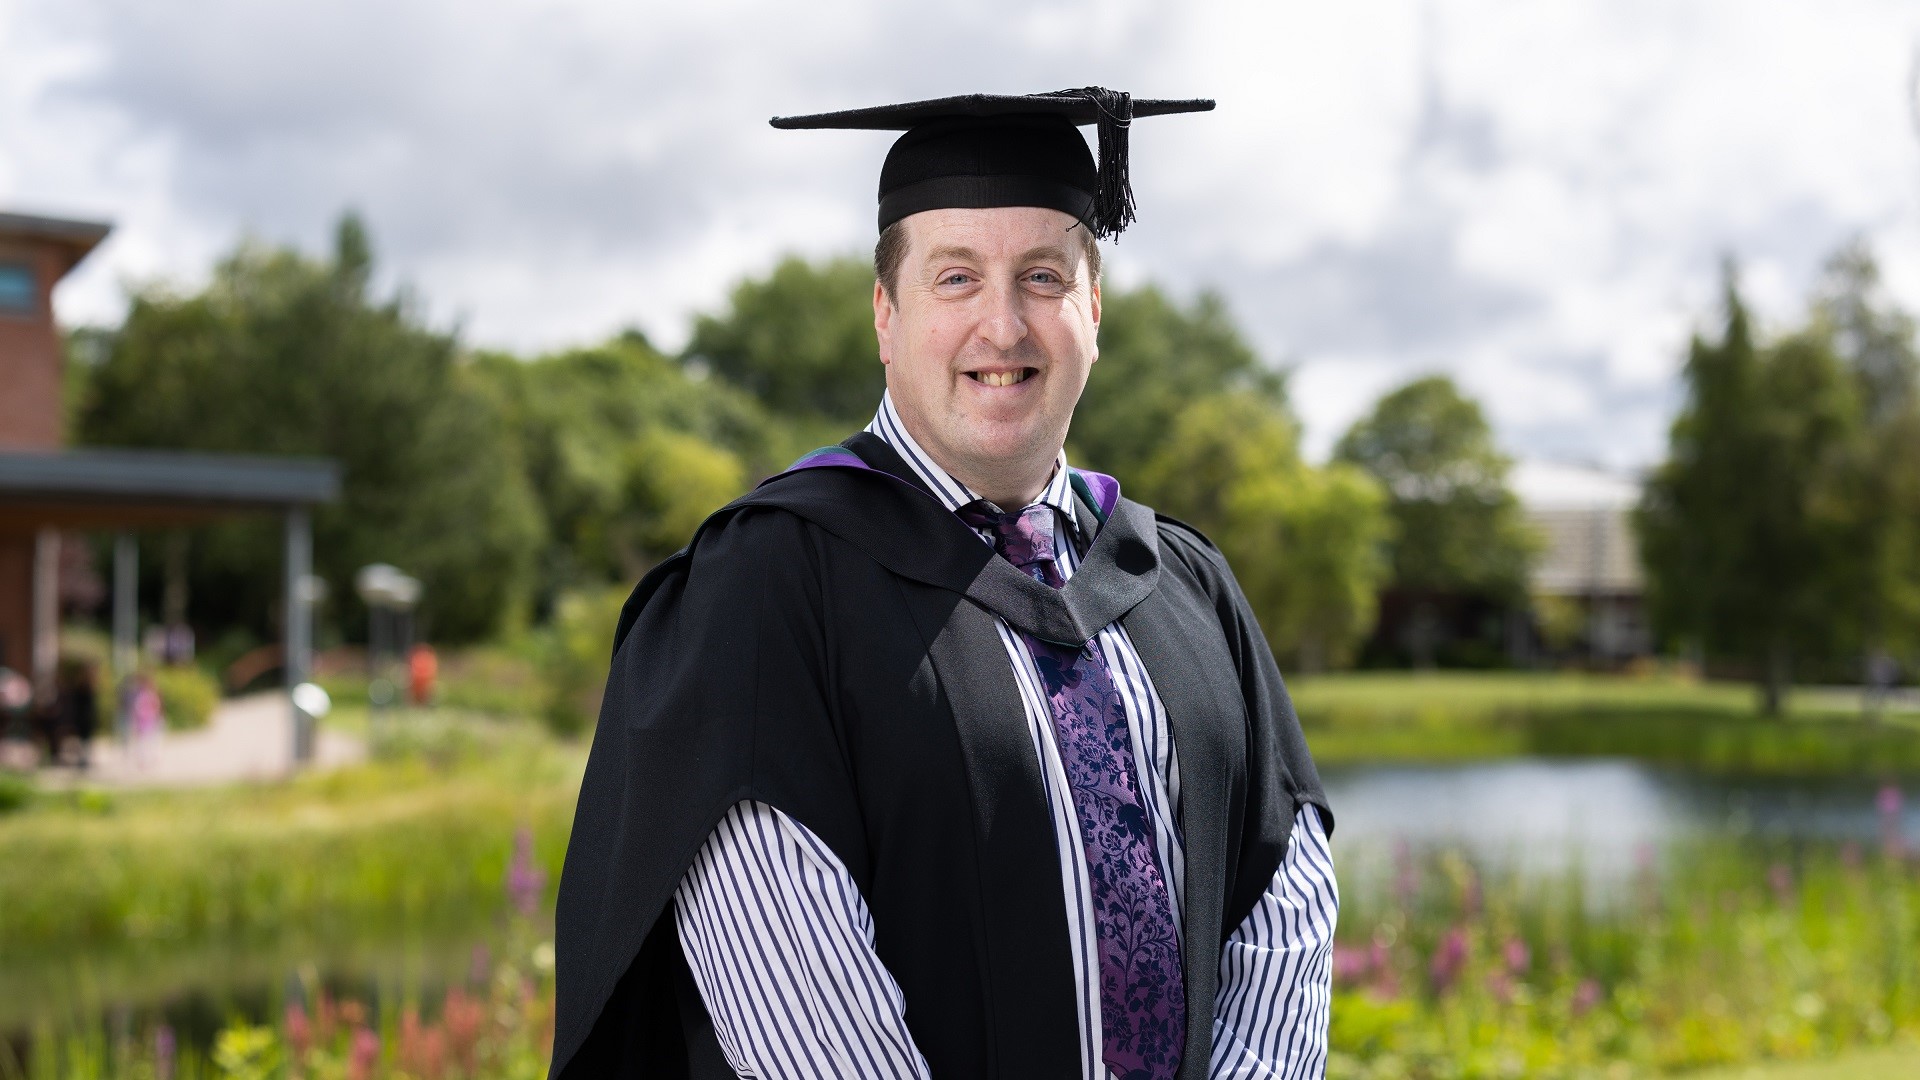 Andrew Sutcliffe wears a cap and gown and stands in front of a lake.